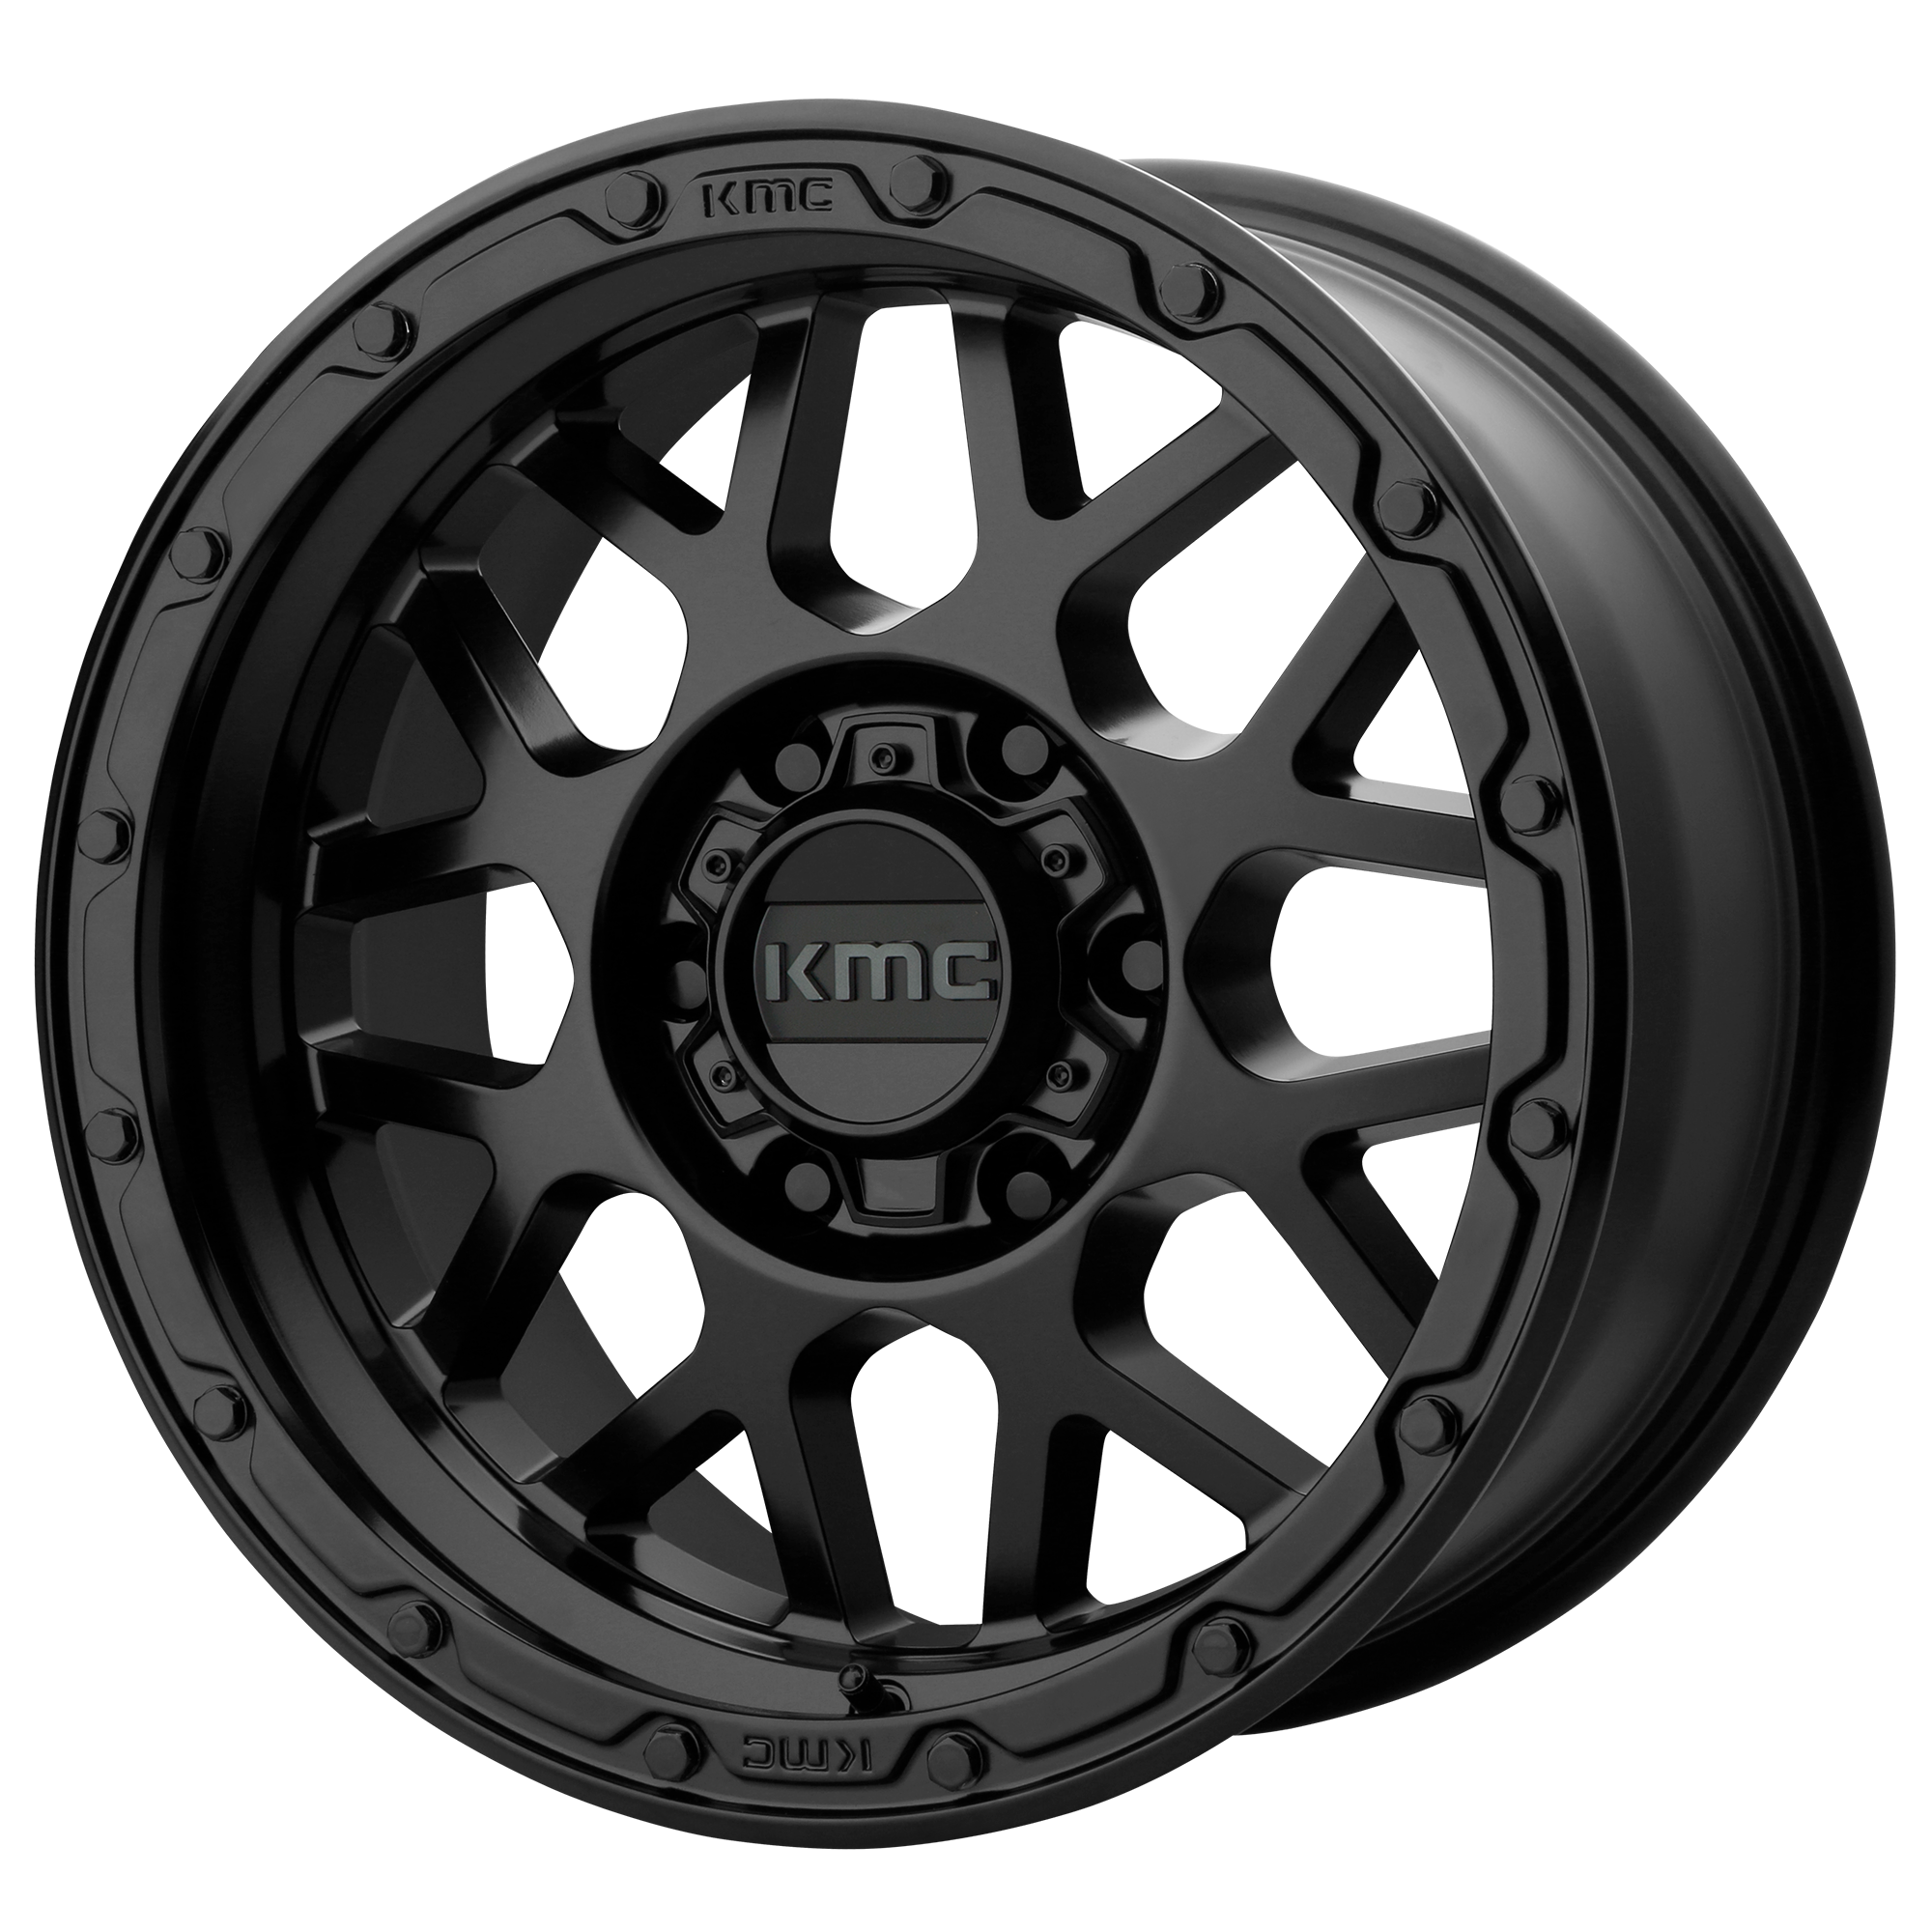 GRENADE OFF-ROAD 20x9 6x120.00 MATTE BLACK (18 mm) - Tires and Engine Performance